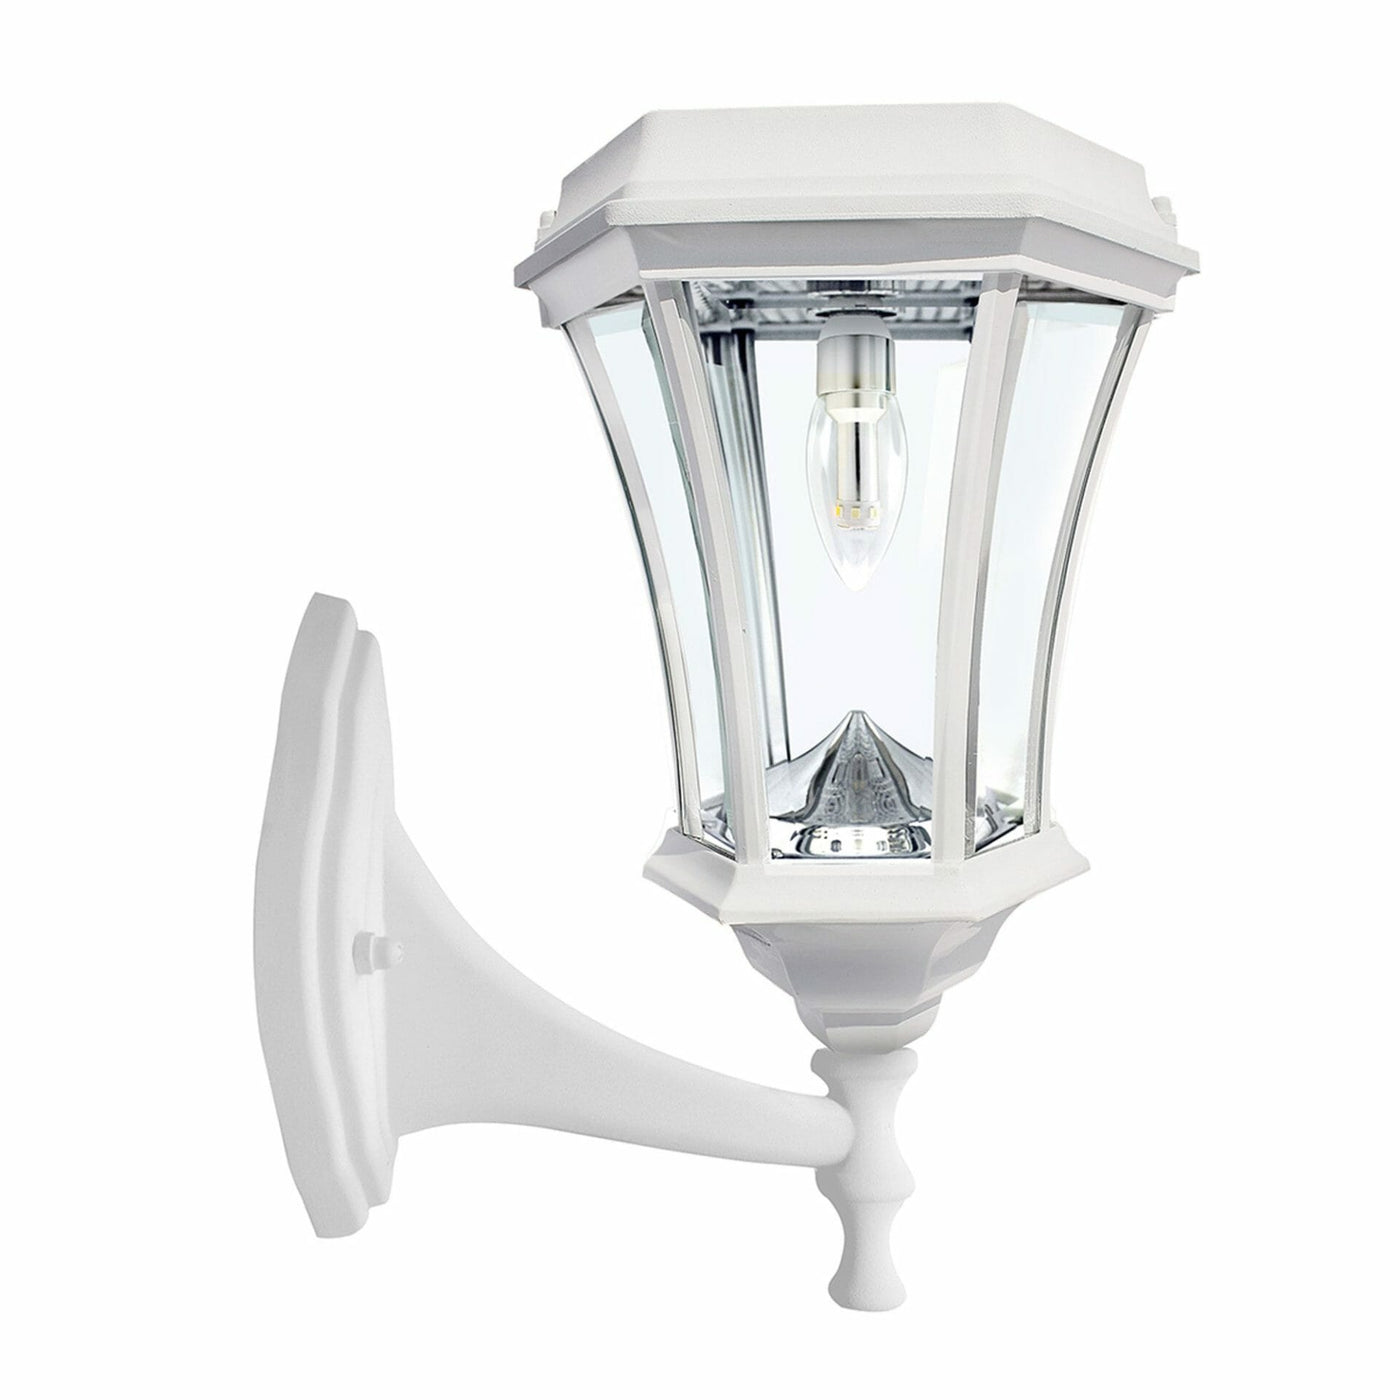 Victorian LED Solar Post Light, 150 Lumens, CCT Selectable 2700K, White or Black Finish, 3 Mounting Options Included